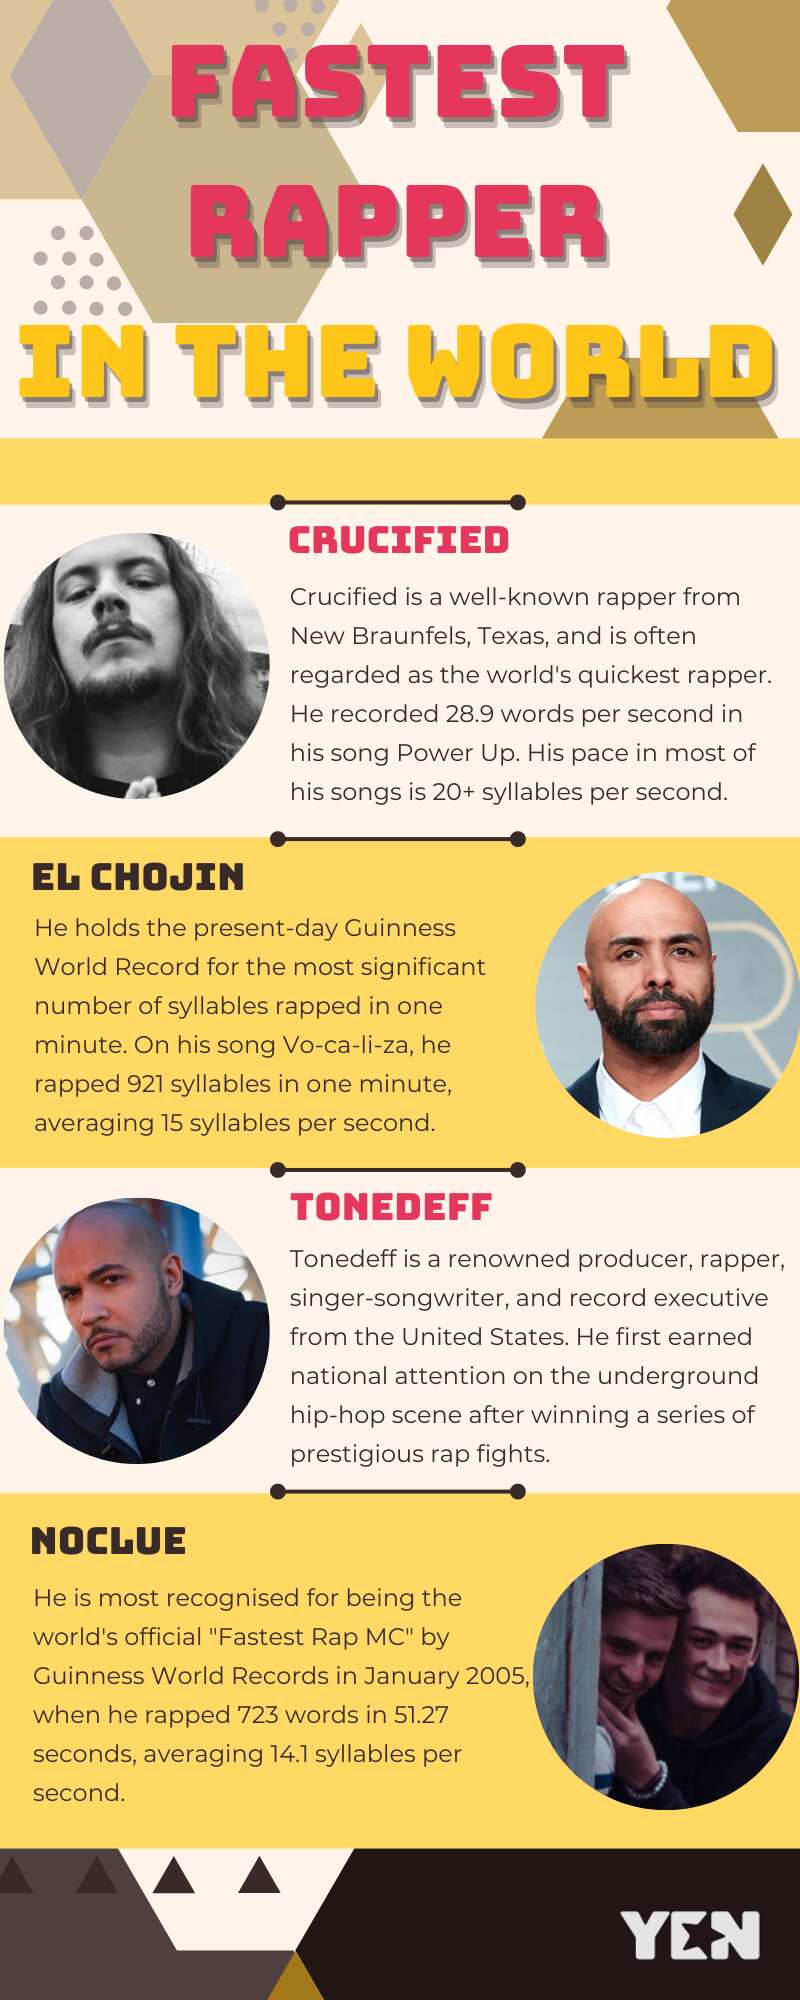 Fastest rappers in the world